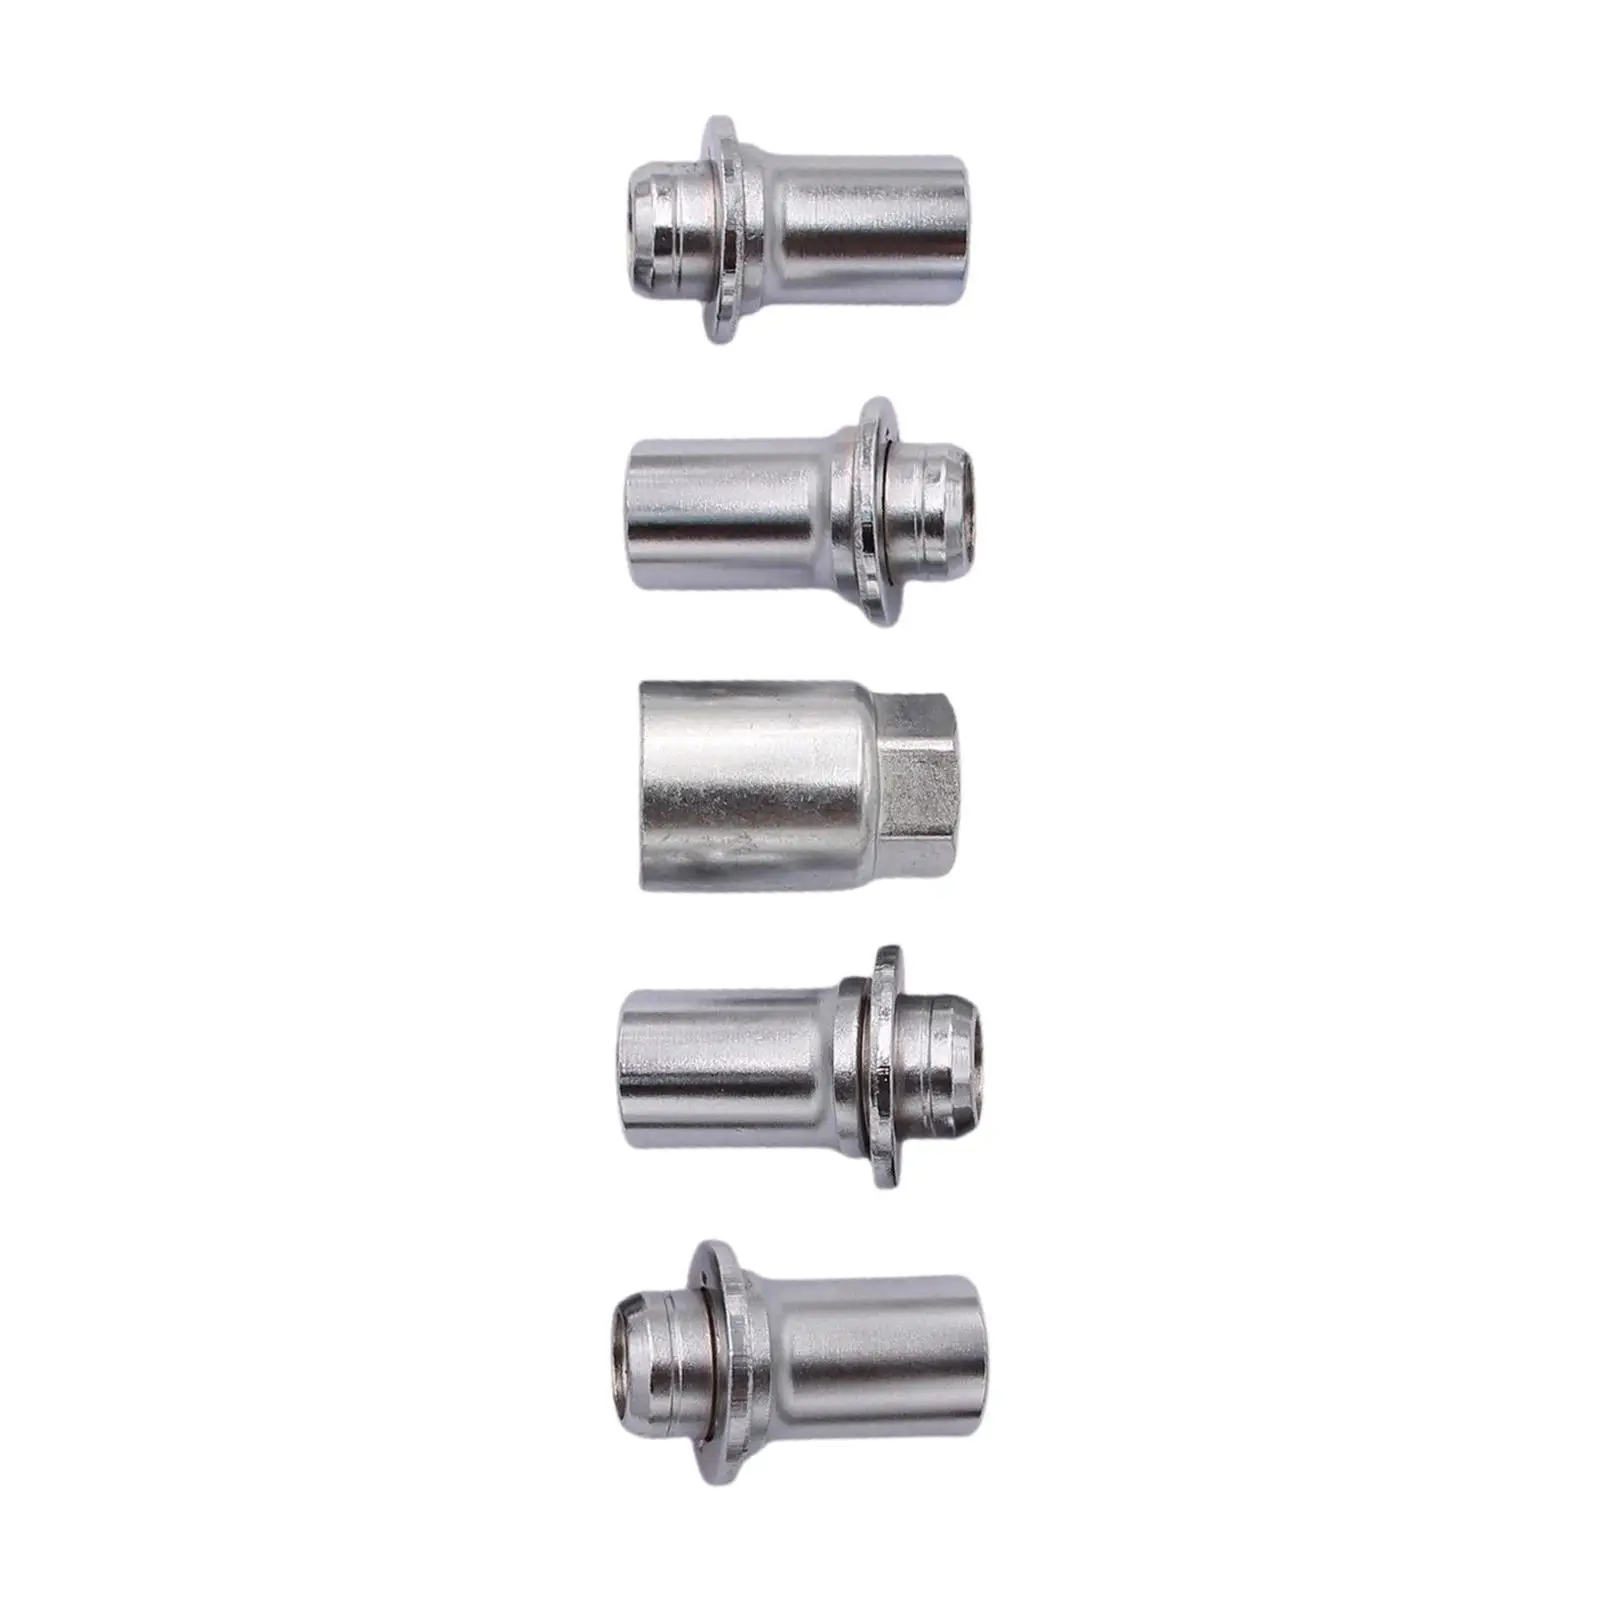 Metal Wheel Lock Set 00276-00901 Accessory Replaces Professional Assembly Wheel Lock Lug Nut Set Durable for 4Runner